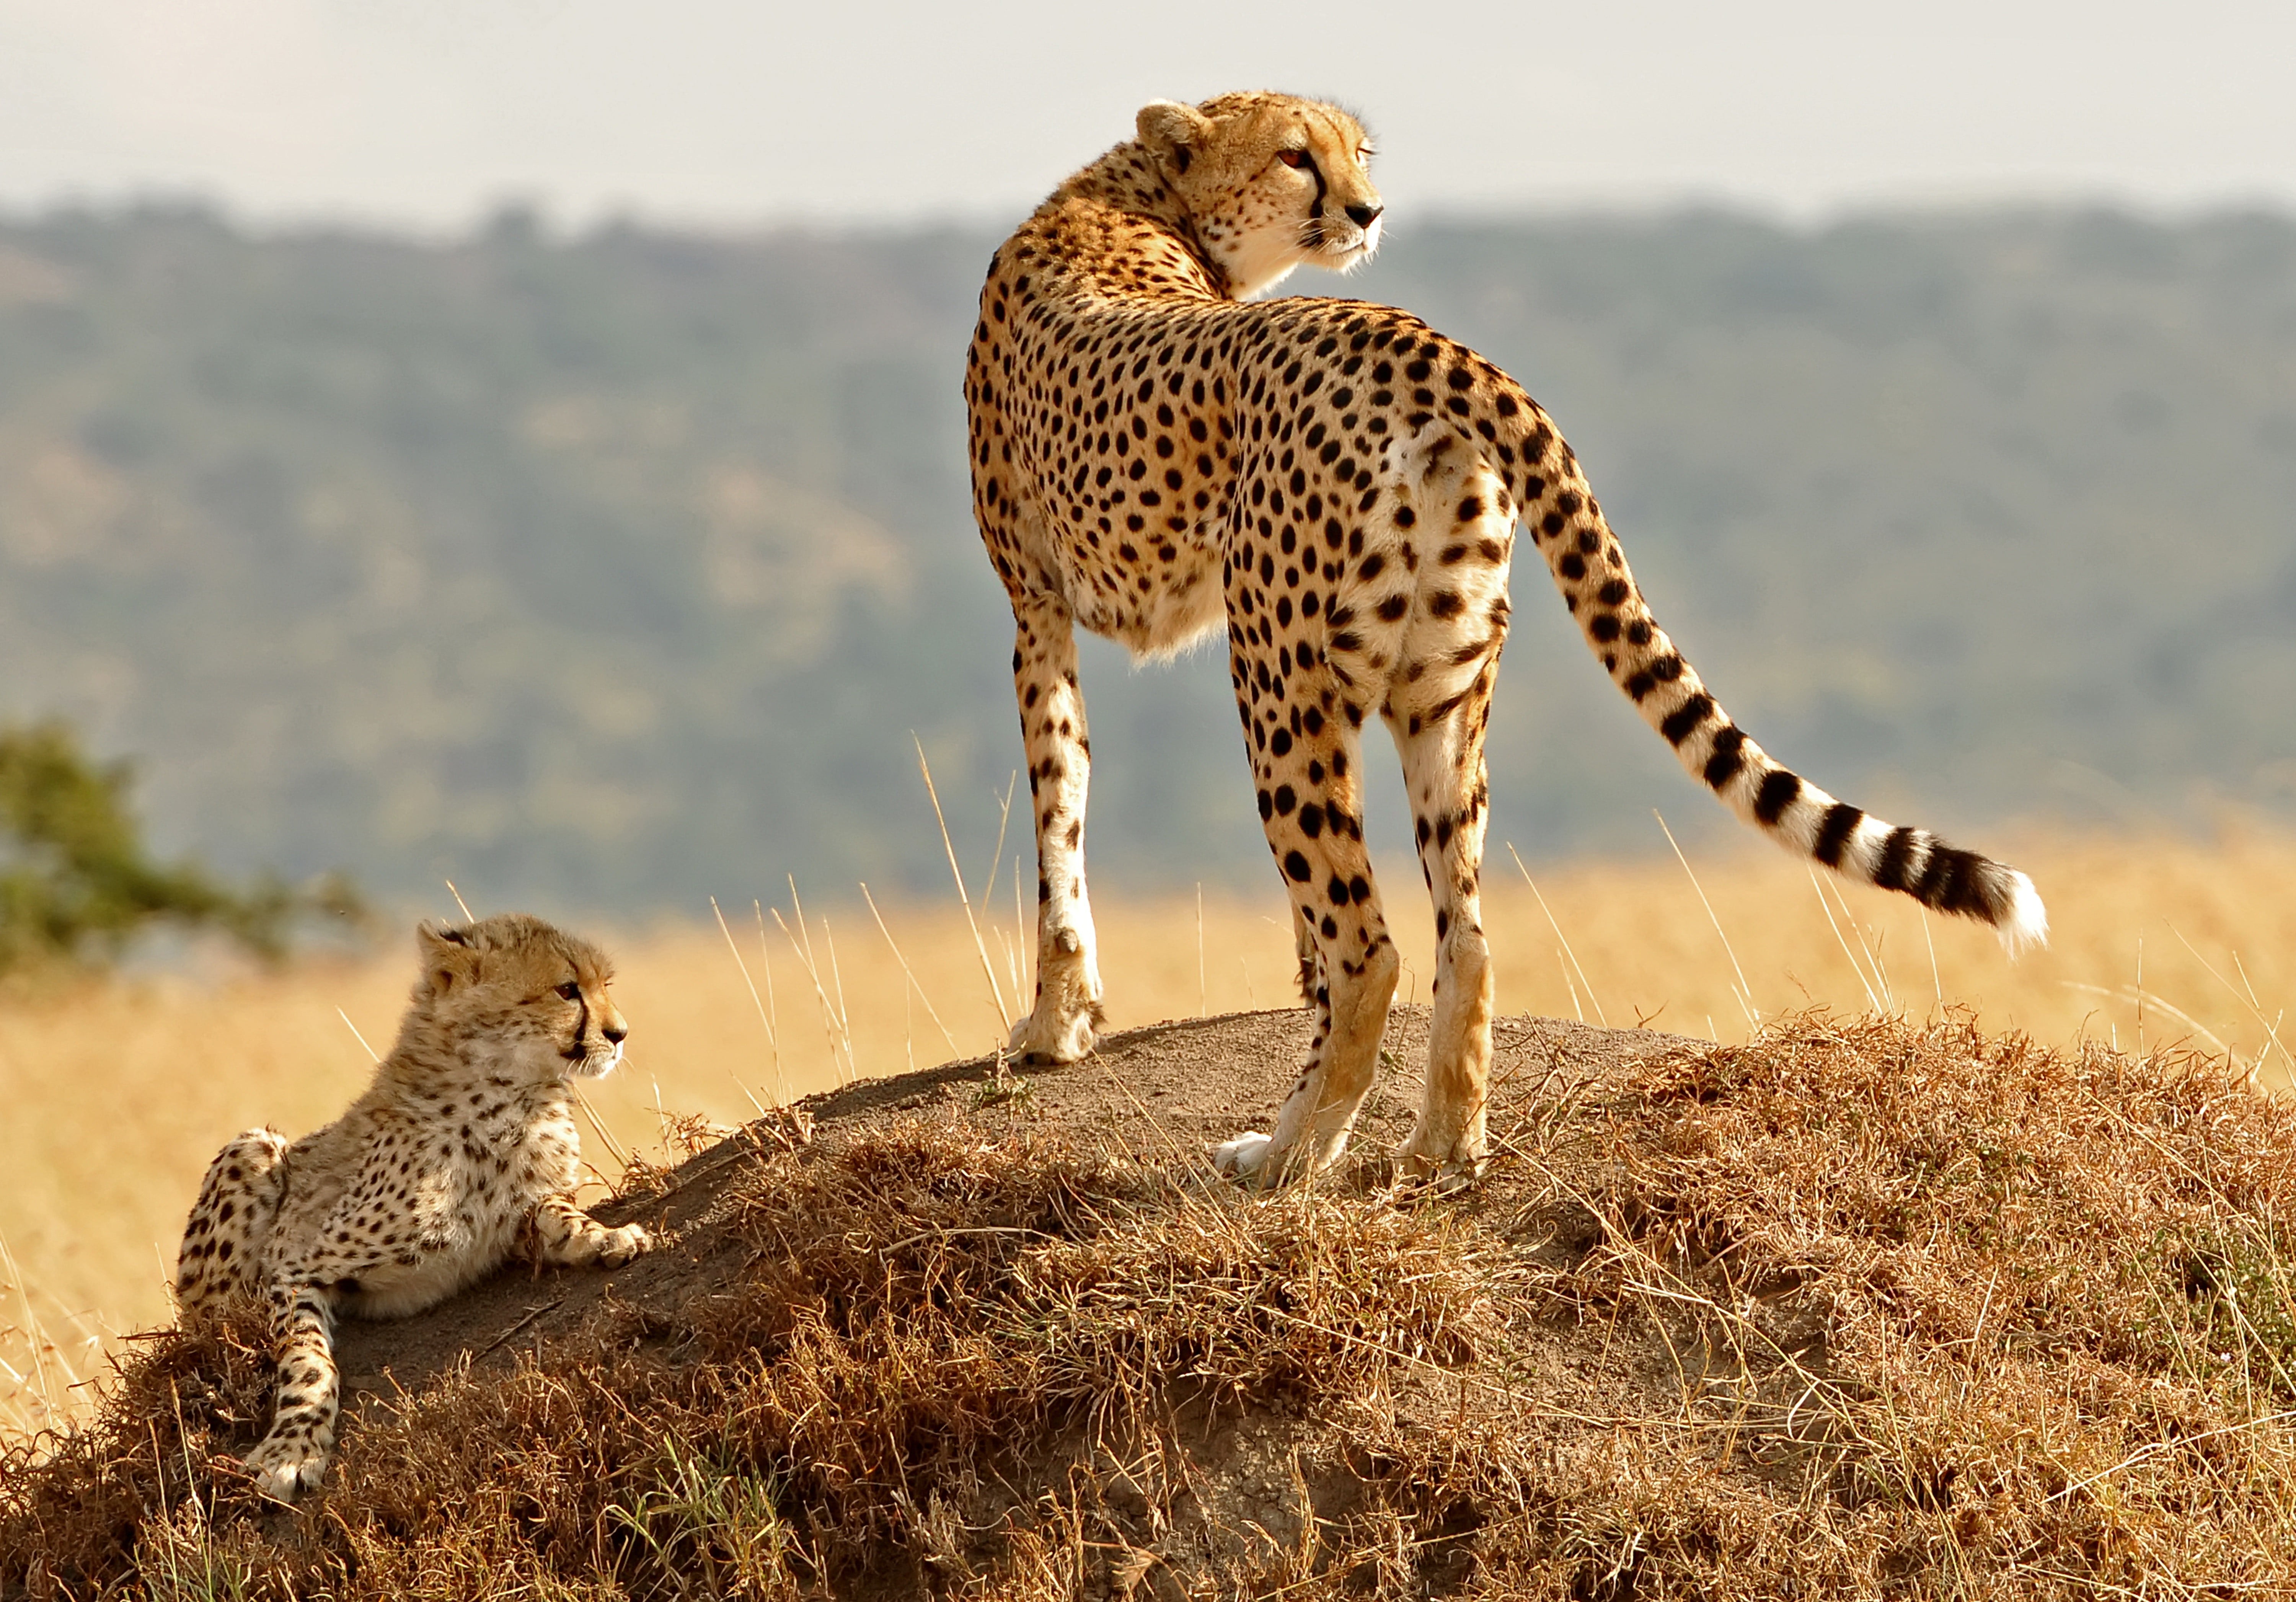 cheetah standing on ground covered with grass with cub, animals